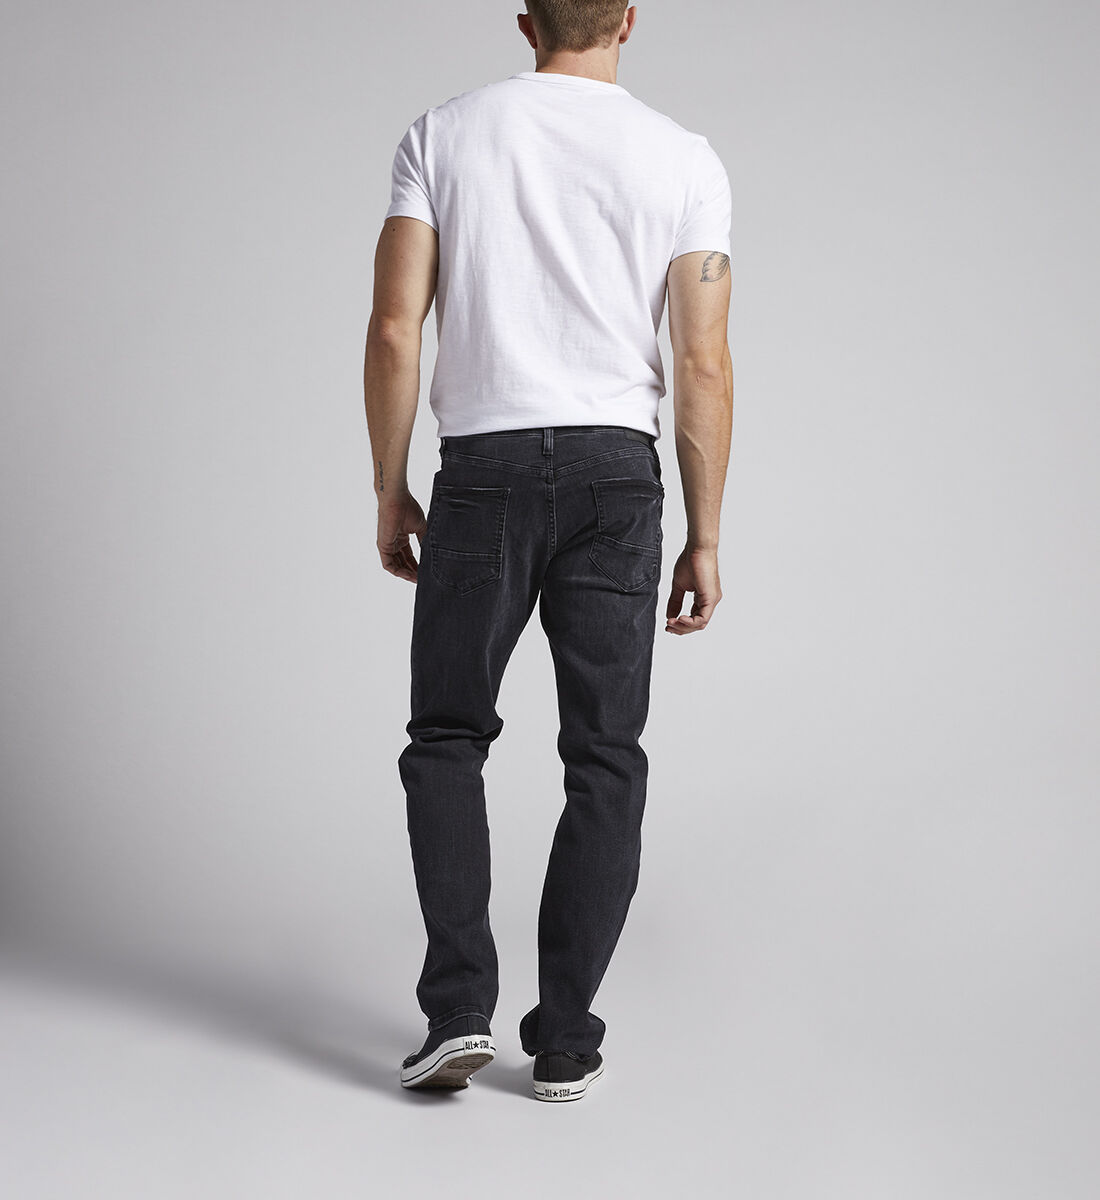 Silver Jeans Co. Machray Athletic Fit Straight Leg Jean